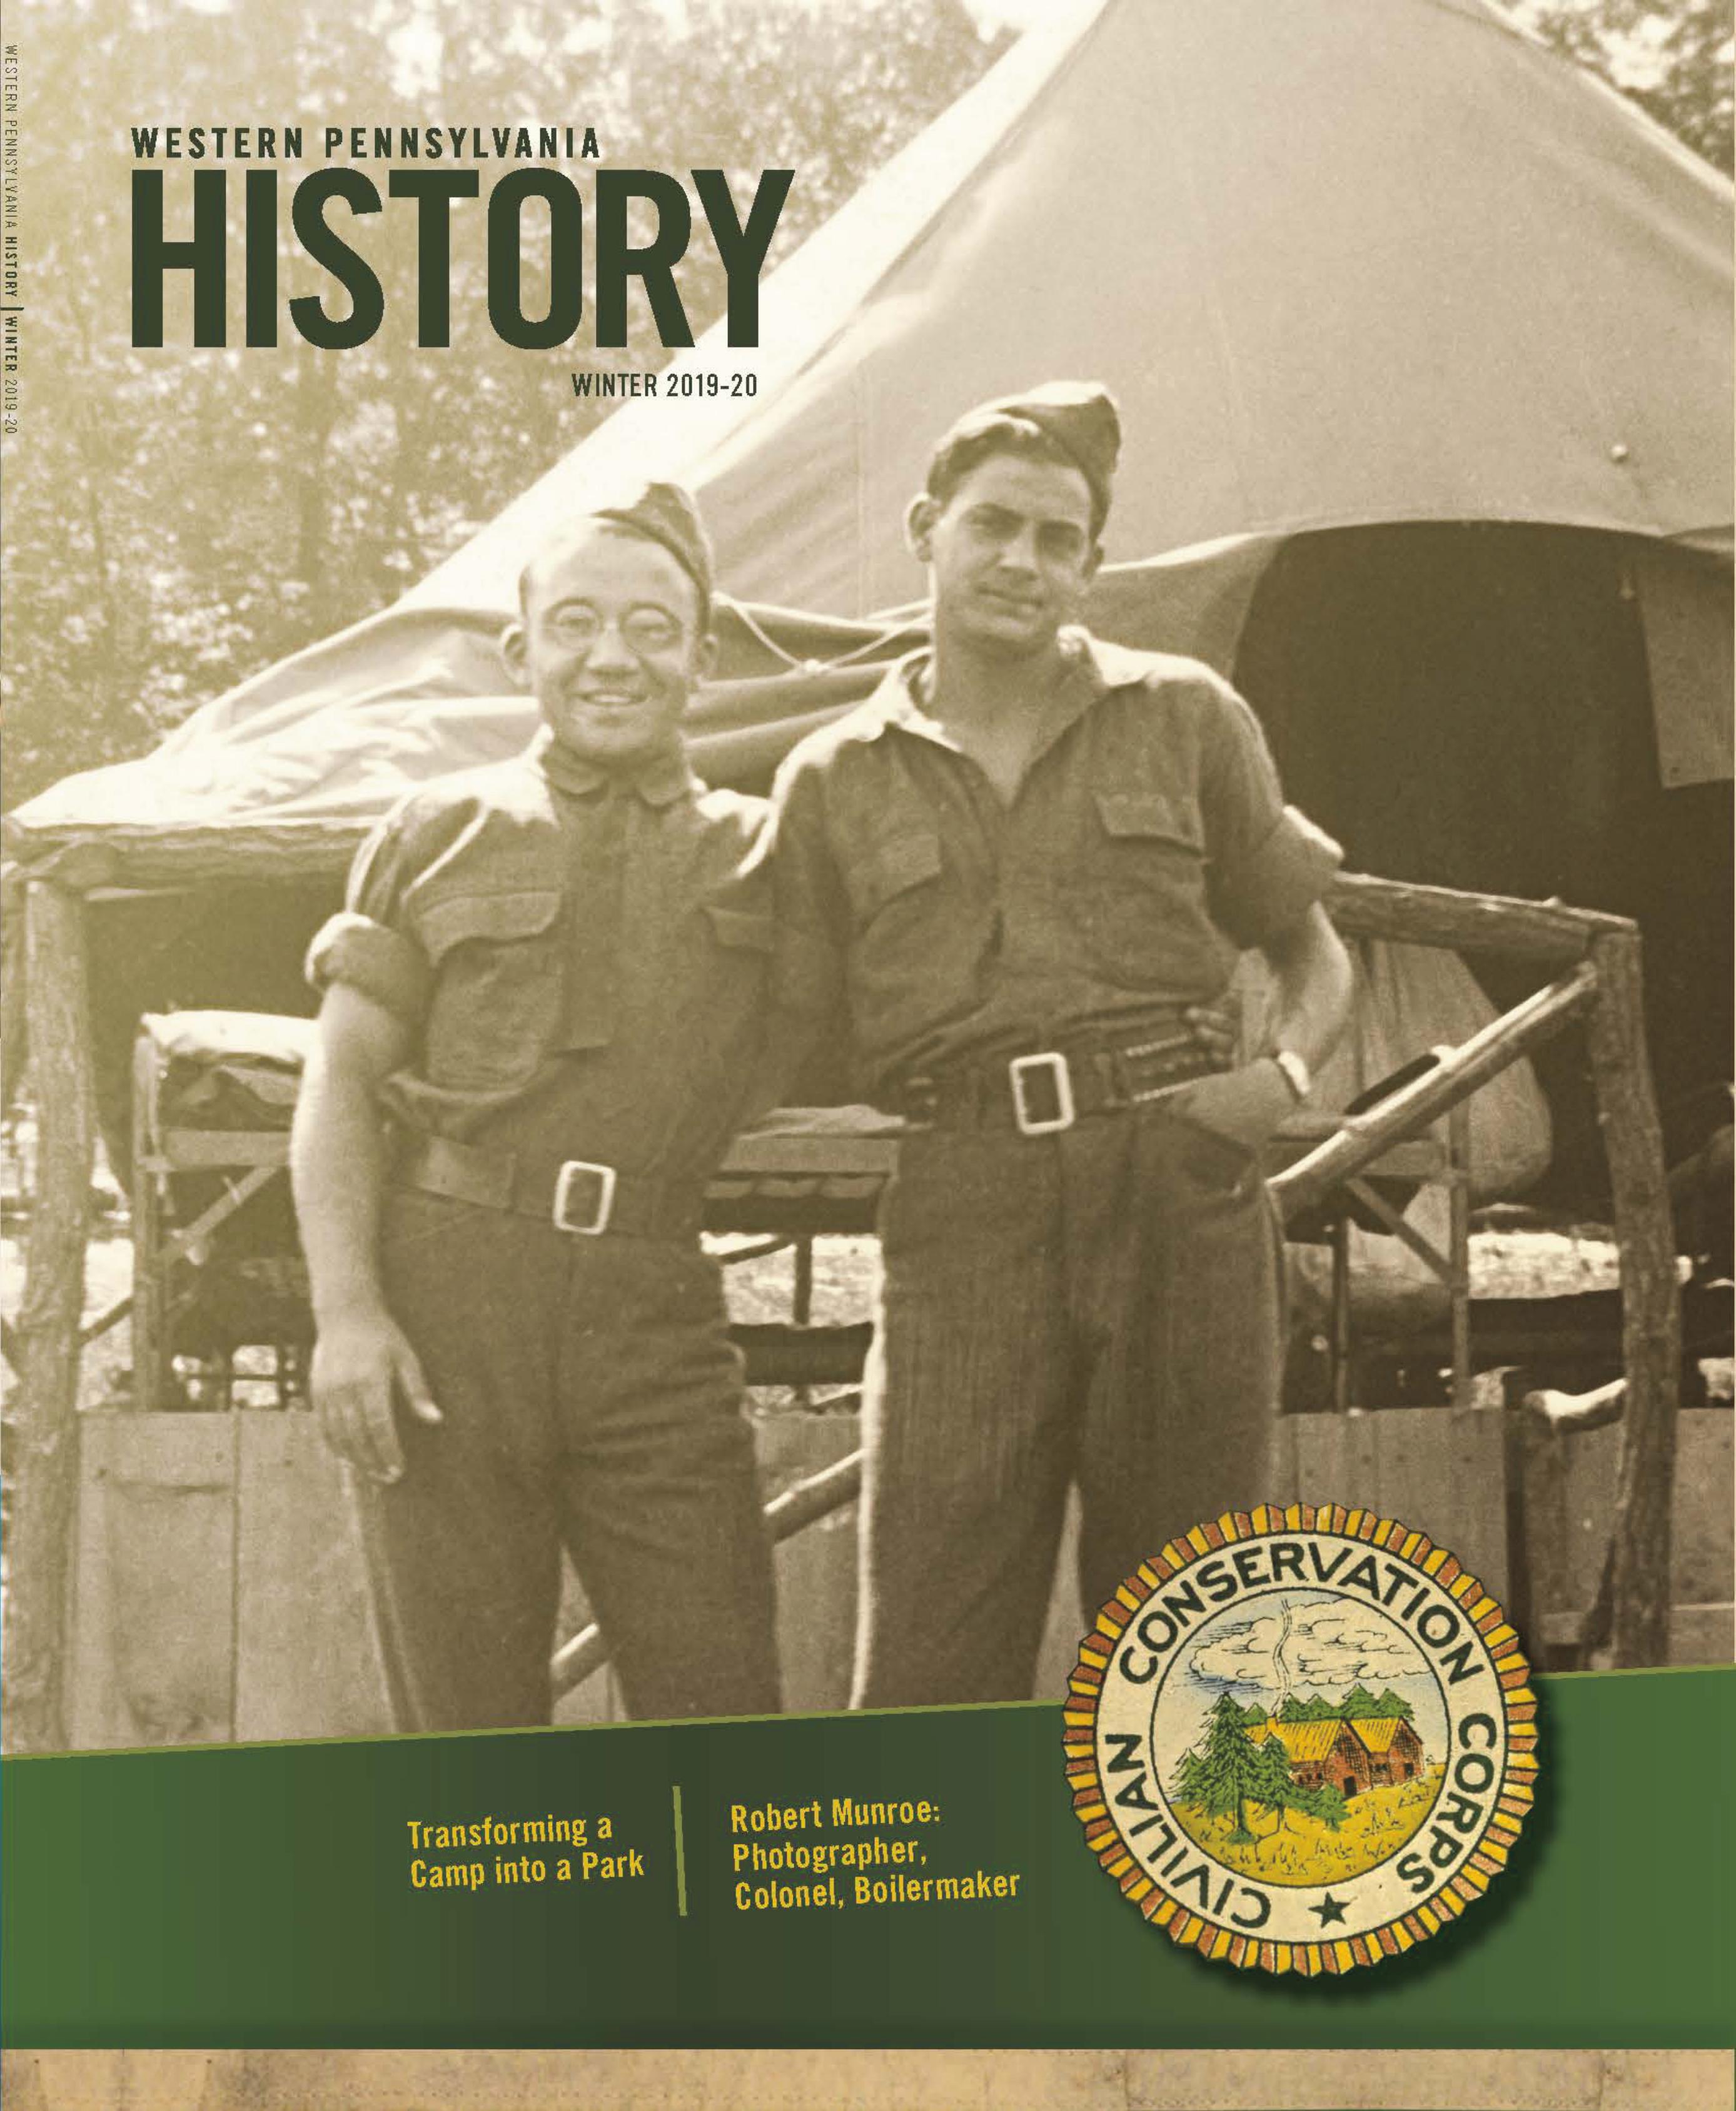 Front cover of Western Pennsylvania History Winter 2019-2020. Sepia photo of two uniformed men posing in front of a tent.